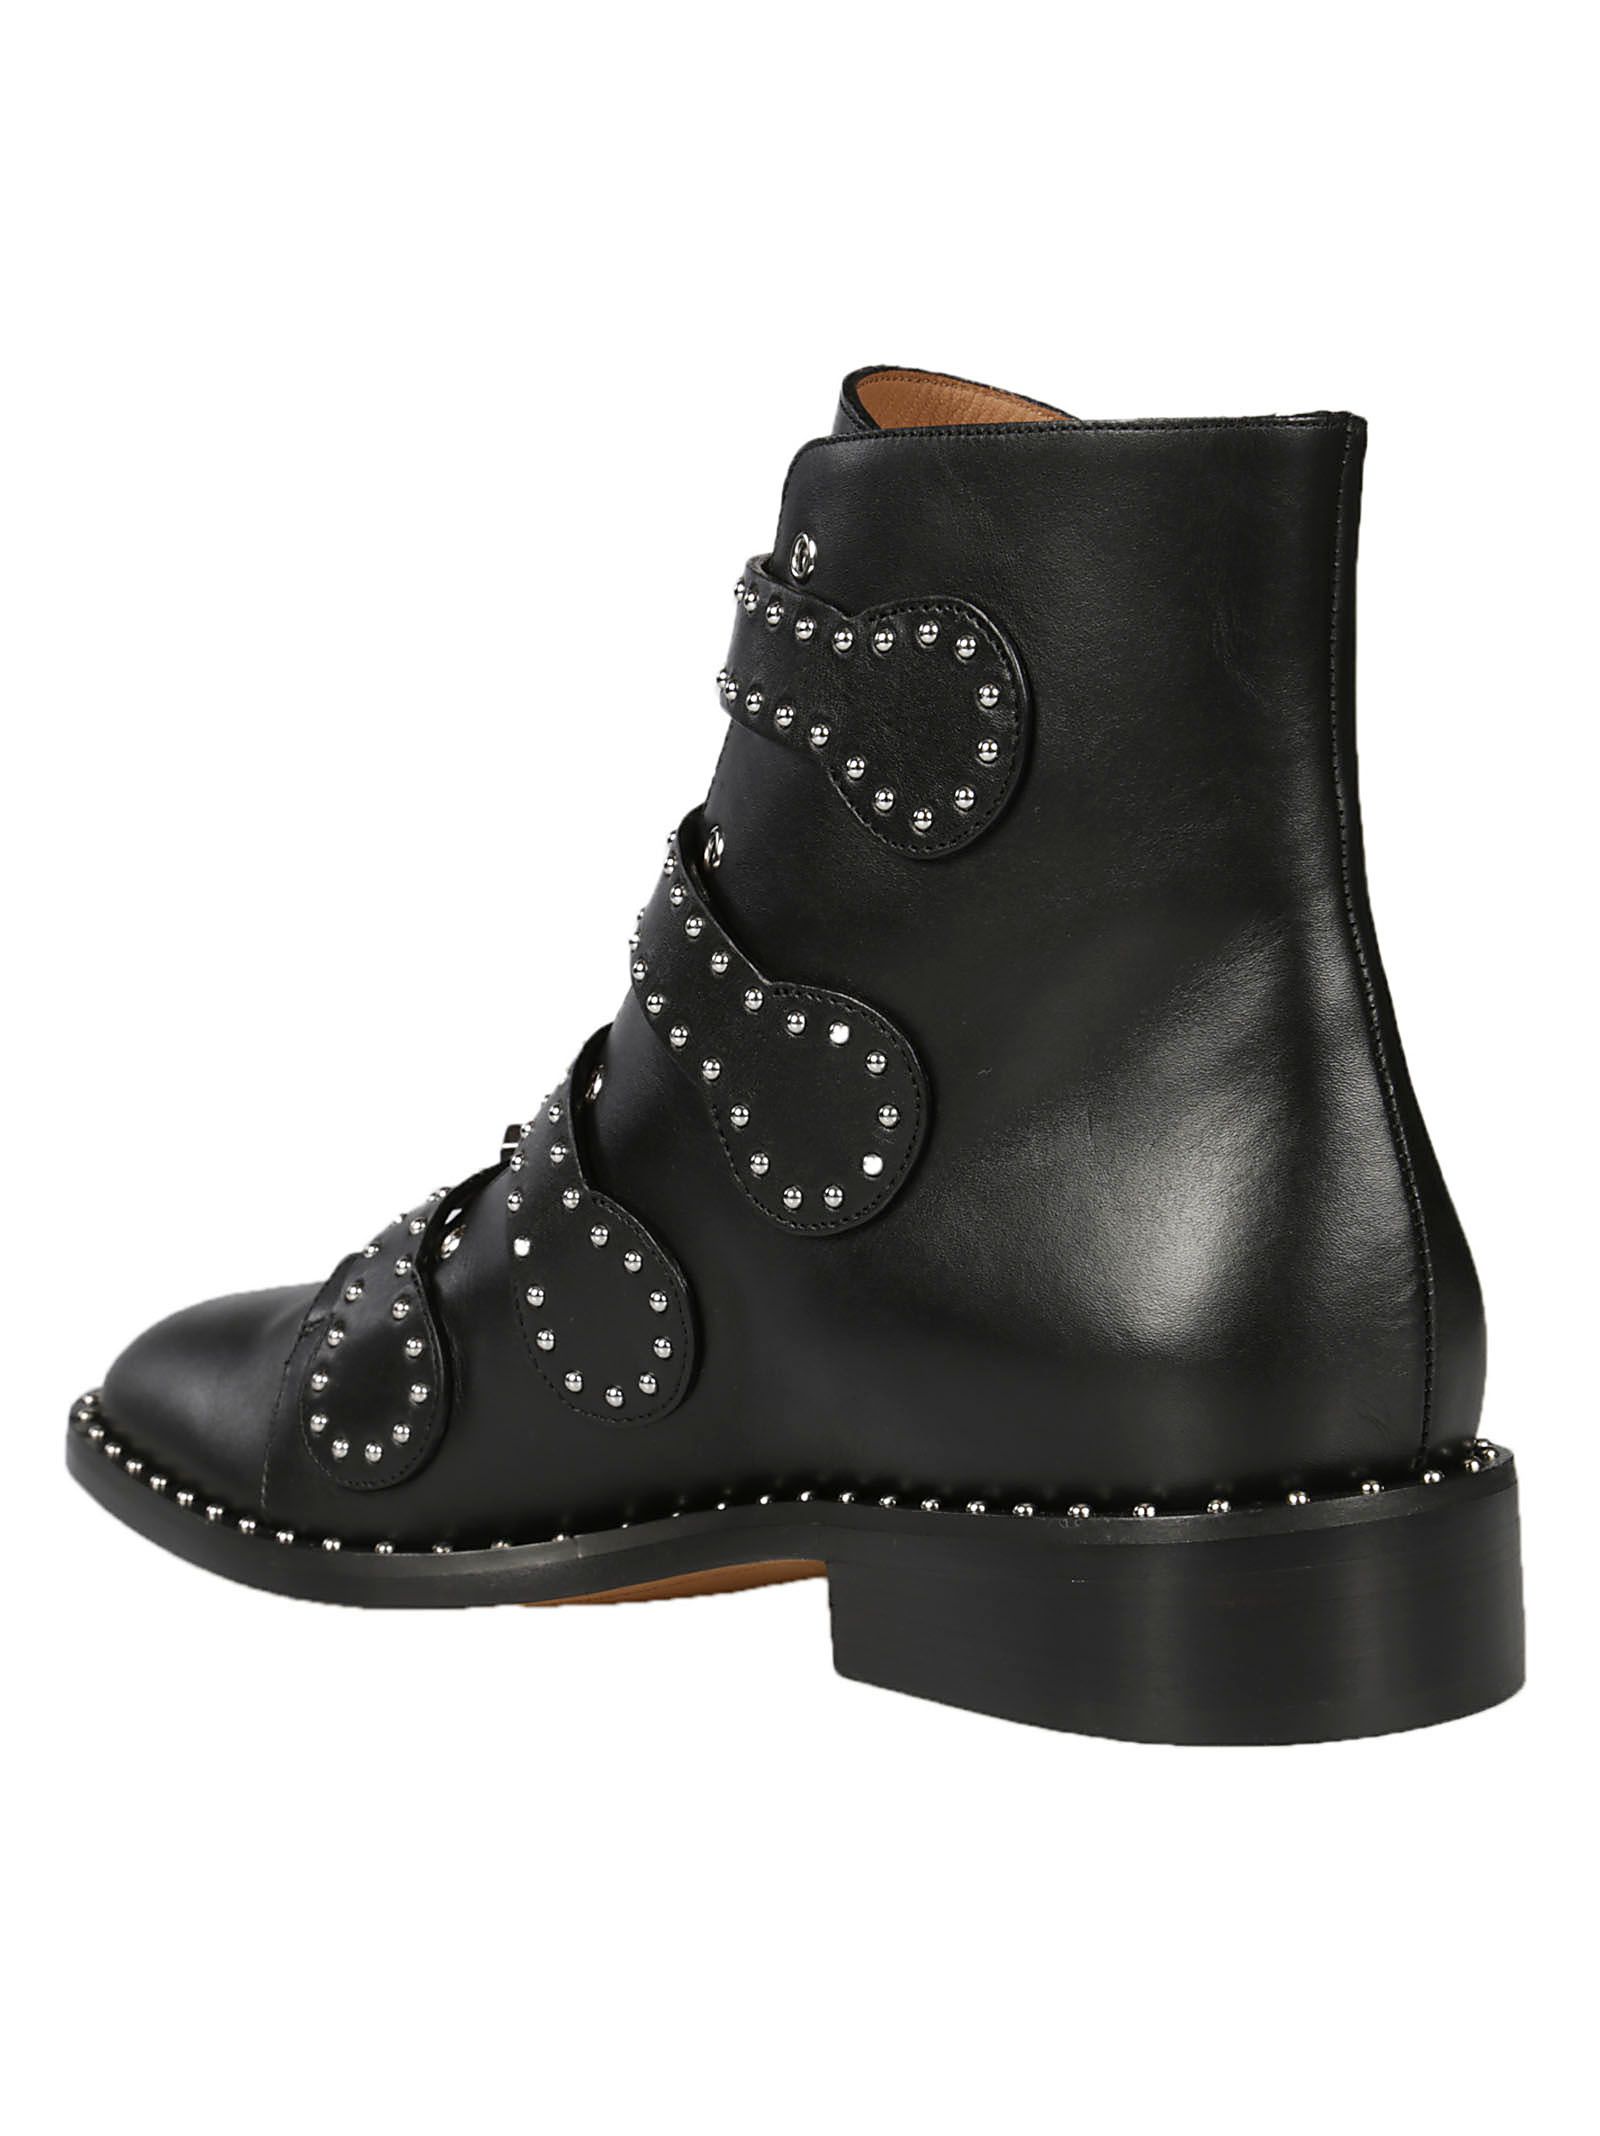 italist | Best price in the market for Givenchy Givenchy Rivets Ankle